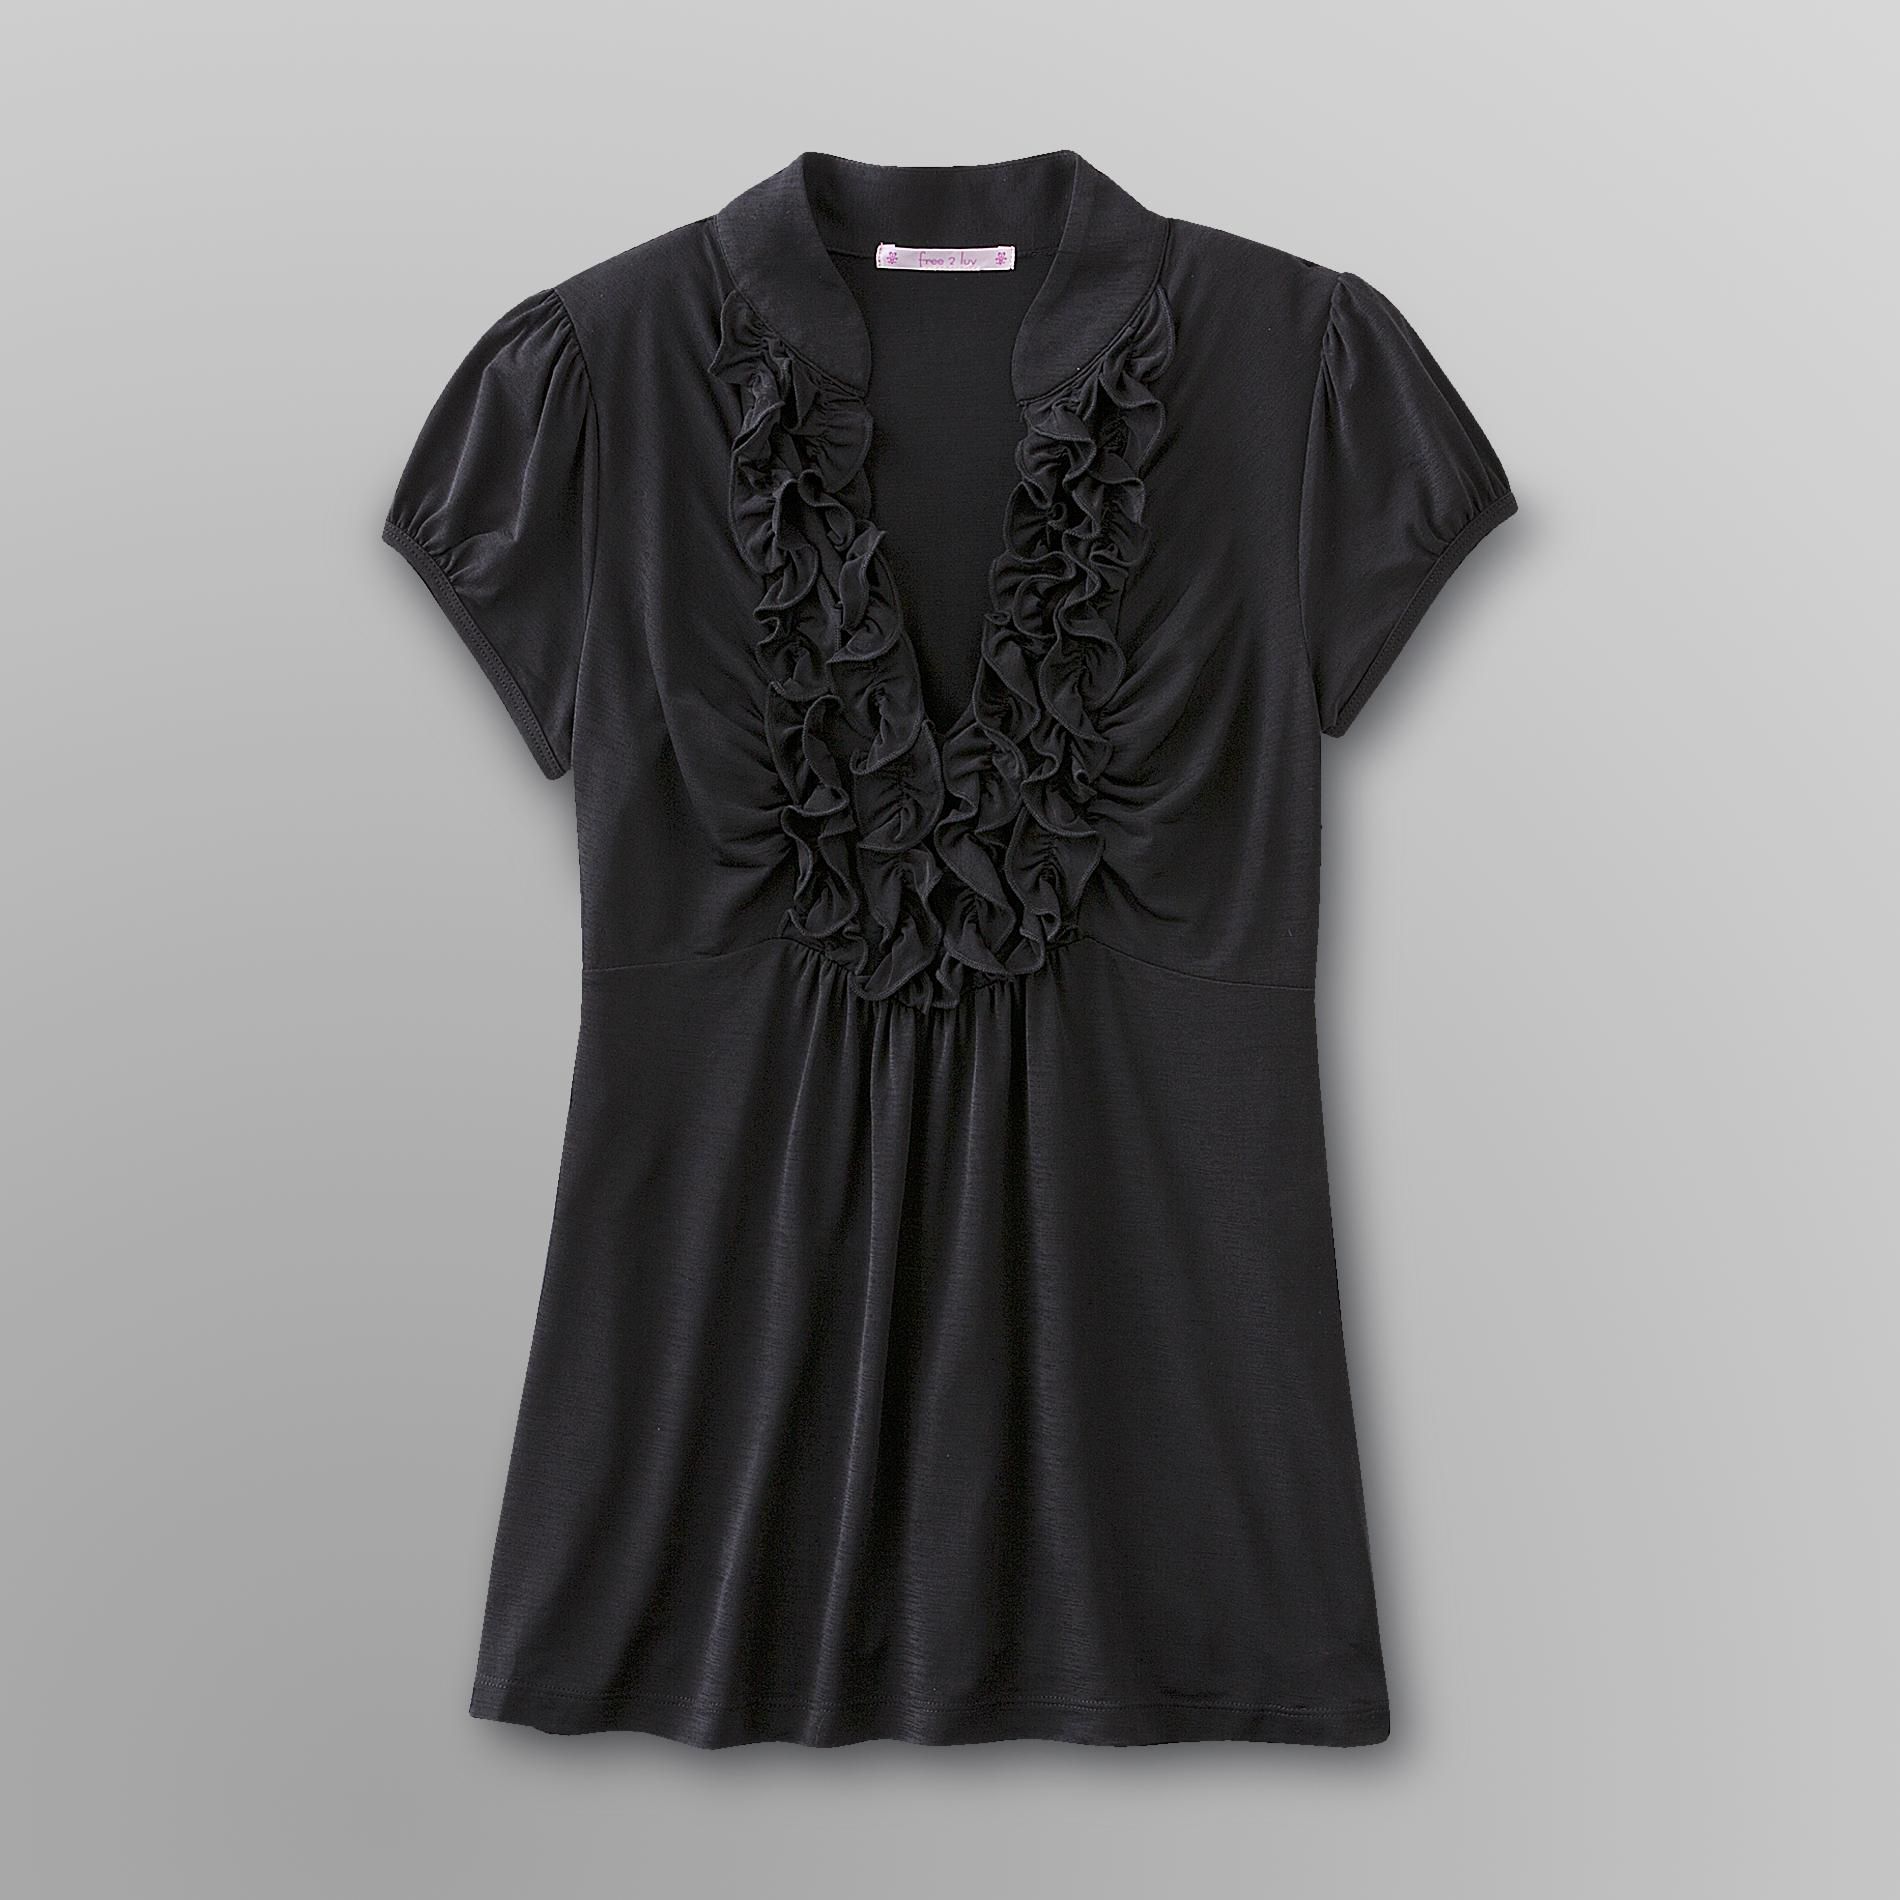 Free2Luv Junior's Ruffled Front Top